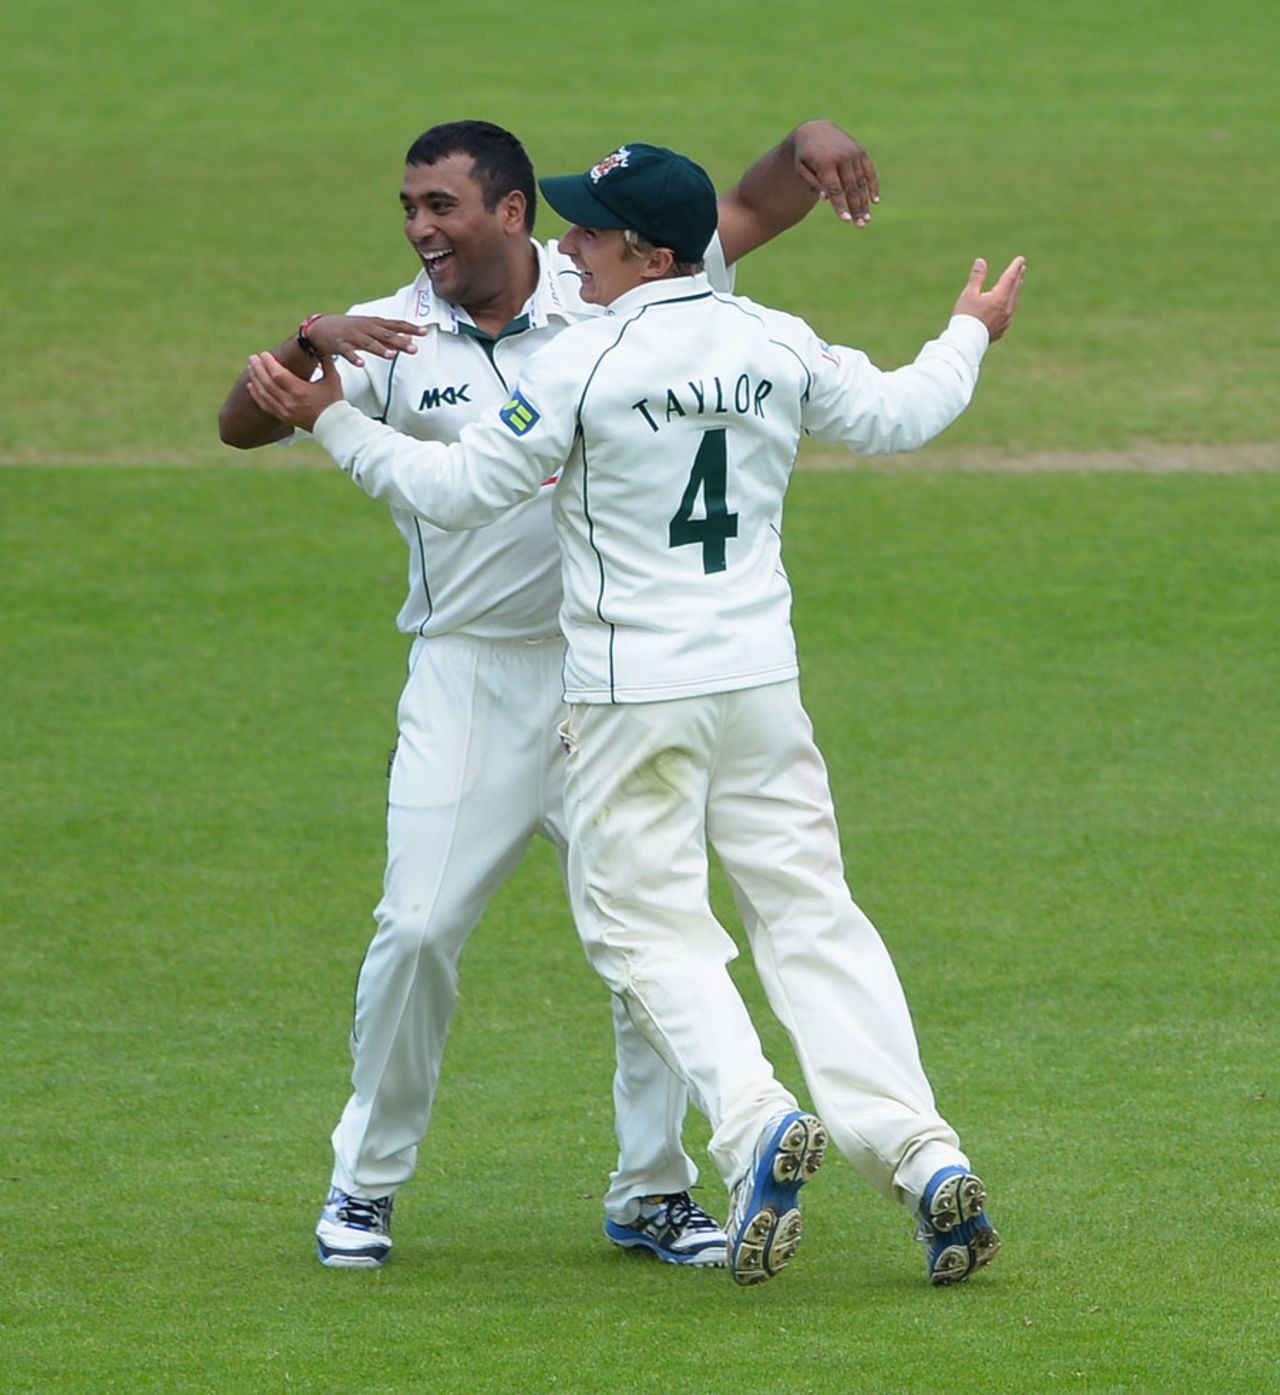 Samit Patel and James Taylor celebrate a wicket, Nottinghamshire v Surrey, County Championship, Division One, Trent Bridge, 2nd day, May 16, 2013